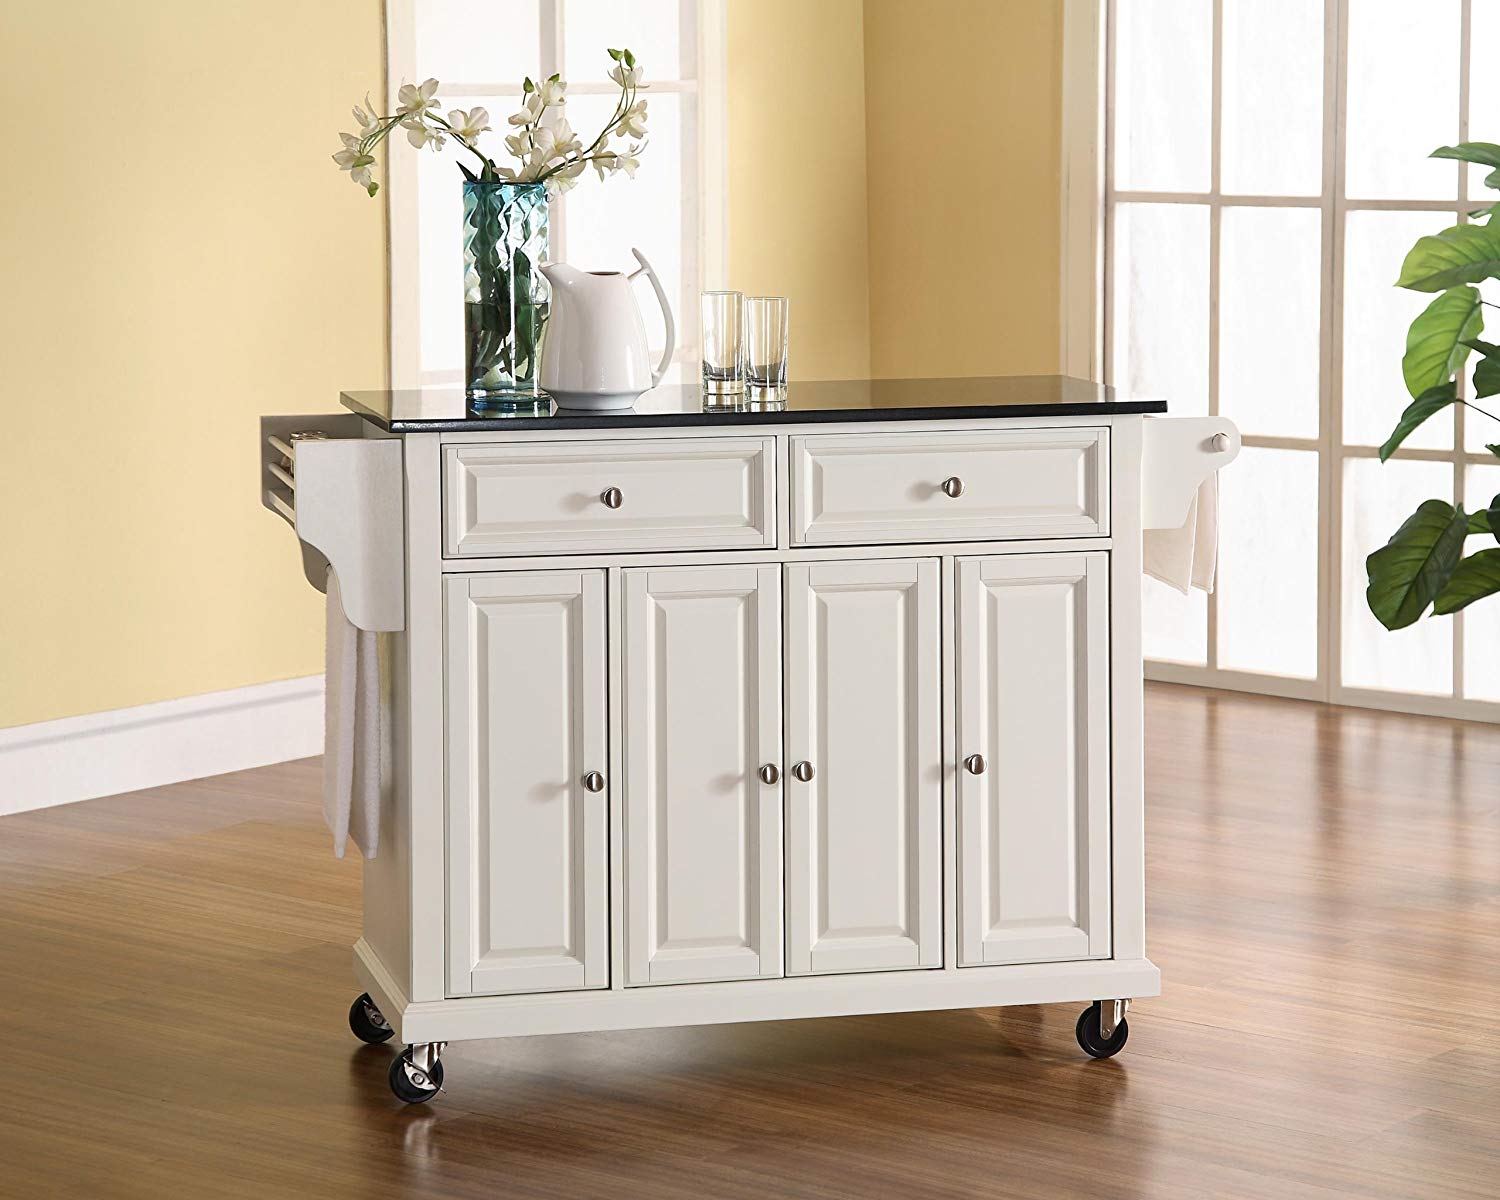 5 Kitchen Islands With Granite Top On Wheels With Reviews And Comparison